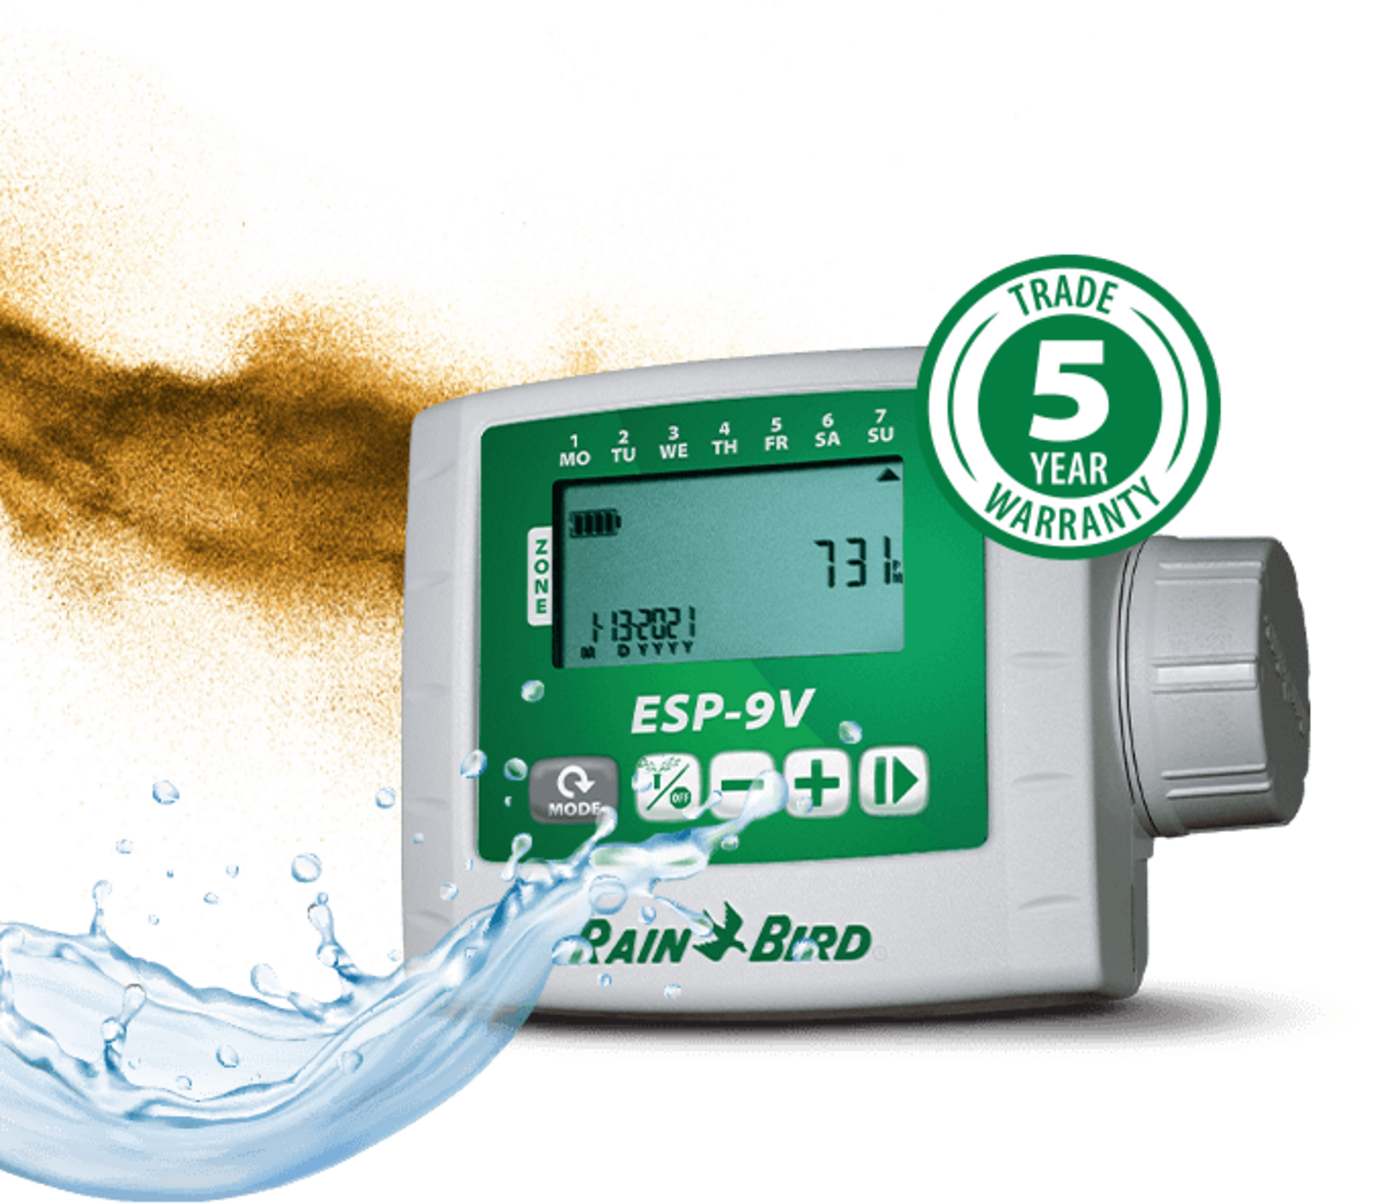 Rain Bird ESP-9V battery-operated irrigation controller with industry leading 5-year warranty